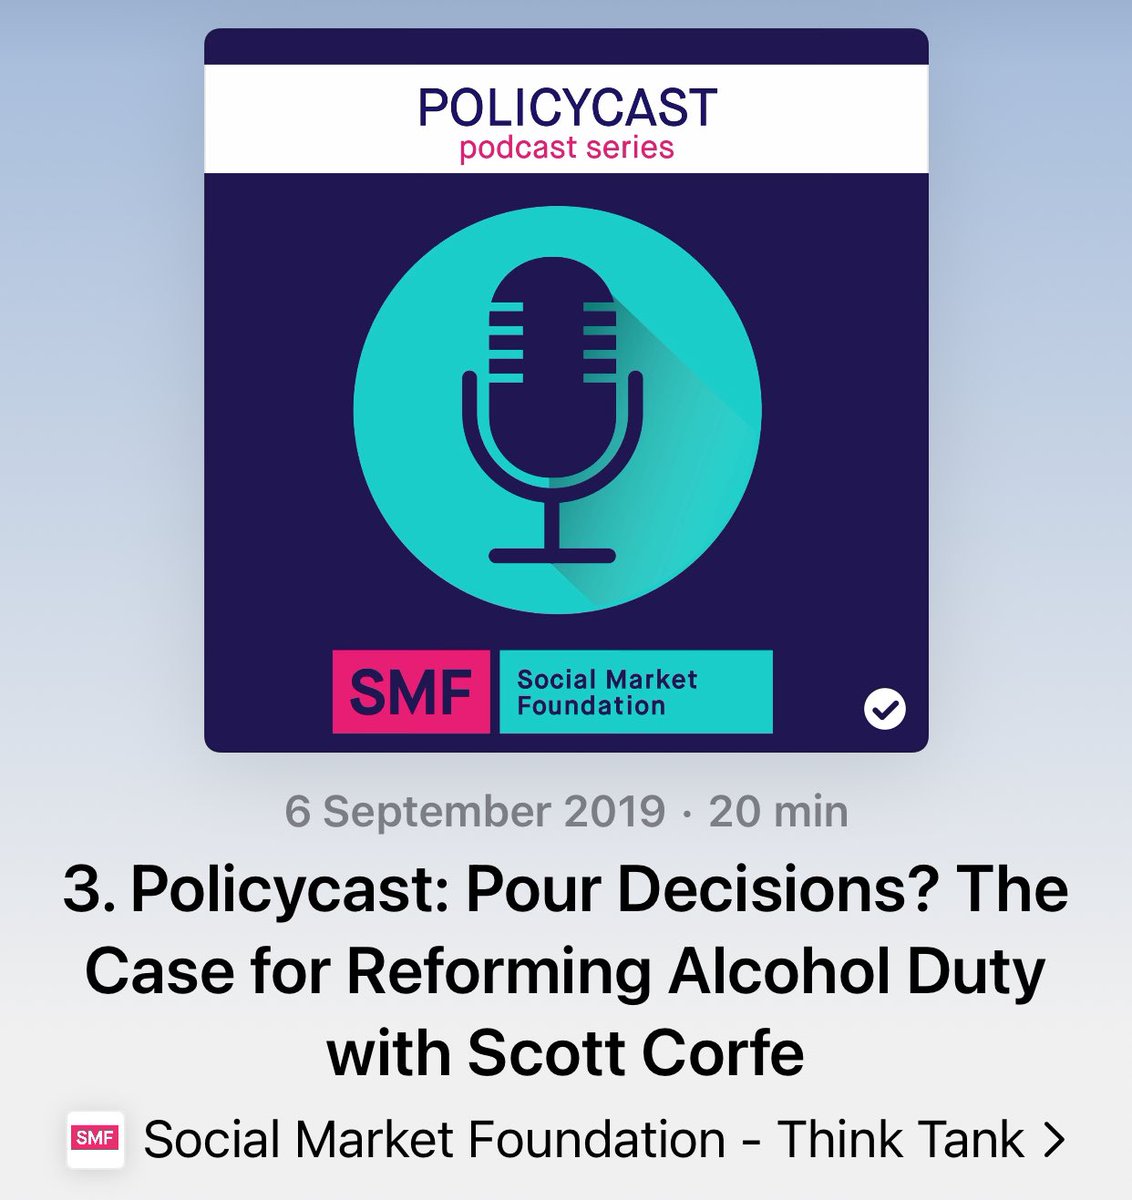 And, as a bonus, they even did a podcast, which will save you reading 72 pages and nonsense like ‘the EU stops us from taxing wine on alcohol content’. ‘The case for reforming the UK's alcohol duty system.’ Listen from the start or, say, from 11 mins in. podcasts.apple.com/gb/podcast/soc…